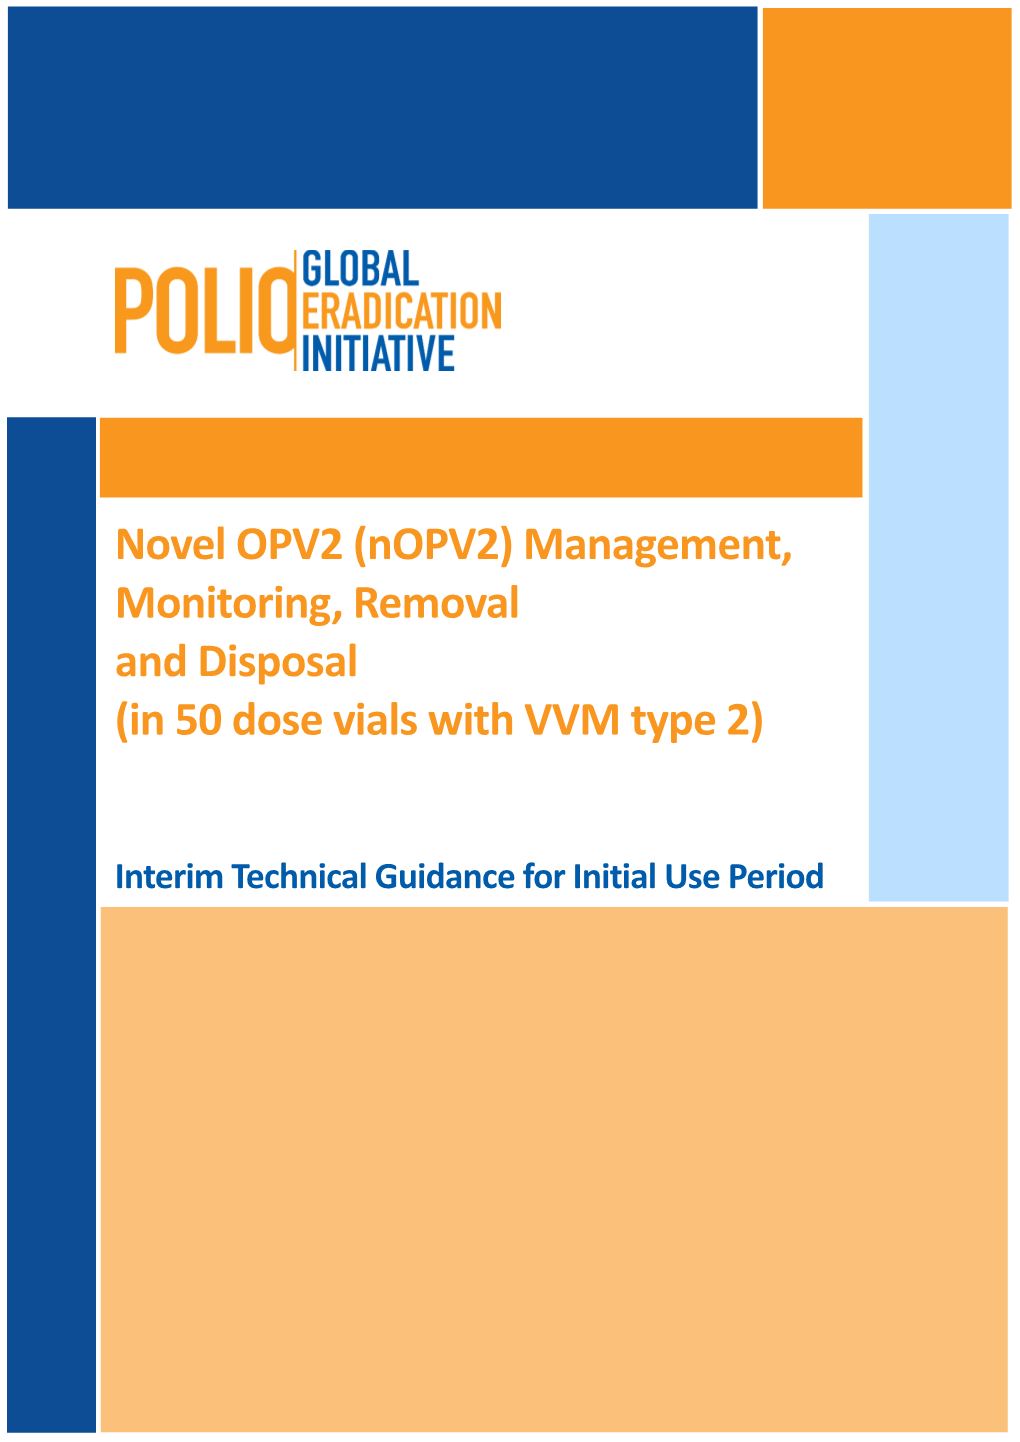 Novel OPV2 (Nopv2) Management, Monitoring, Removal and Disposal (In 50 Dose Vials with VVM Type 2)